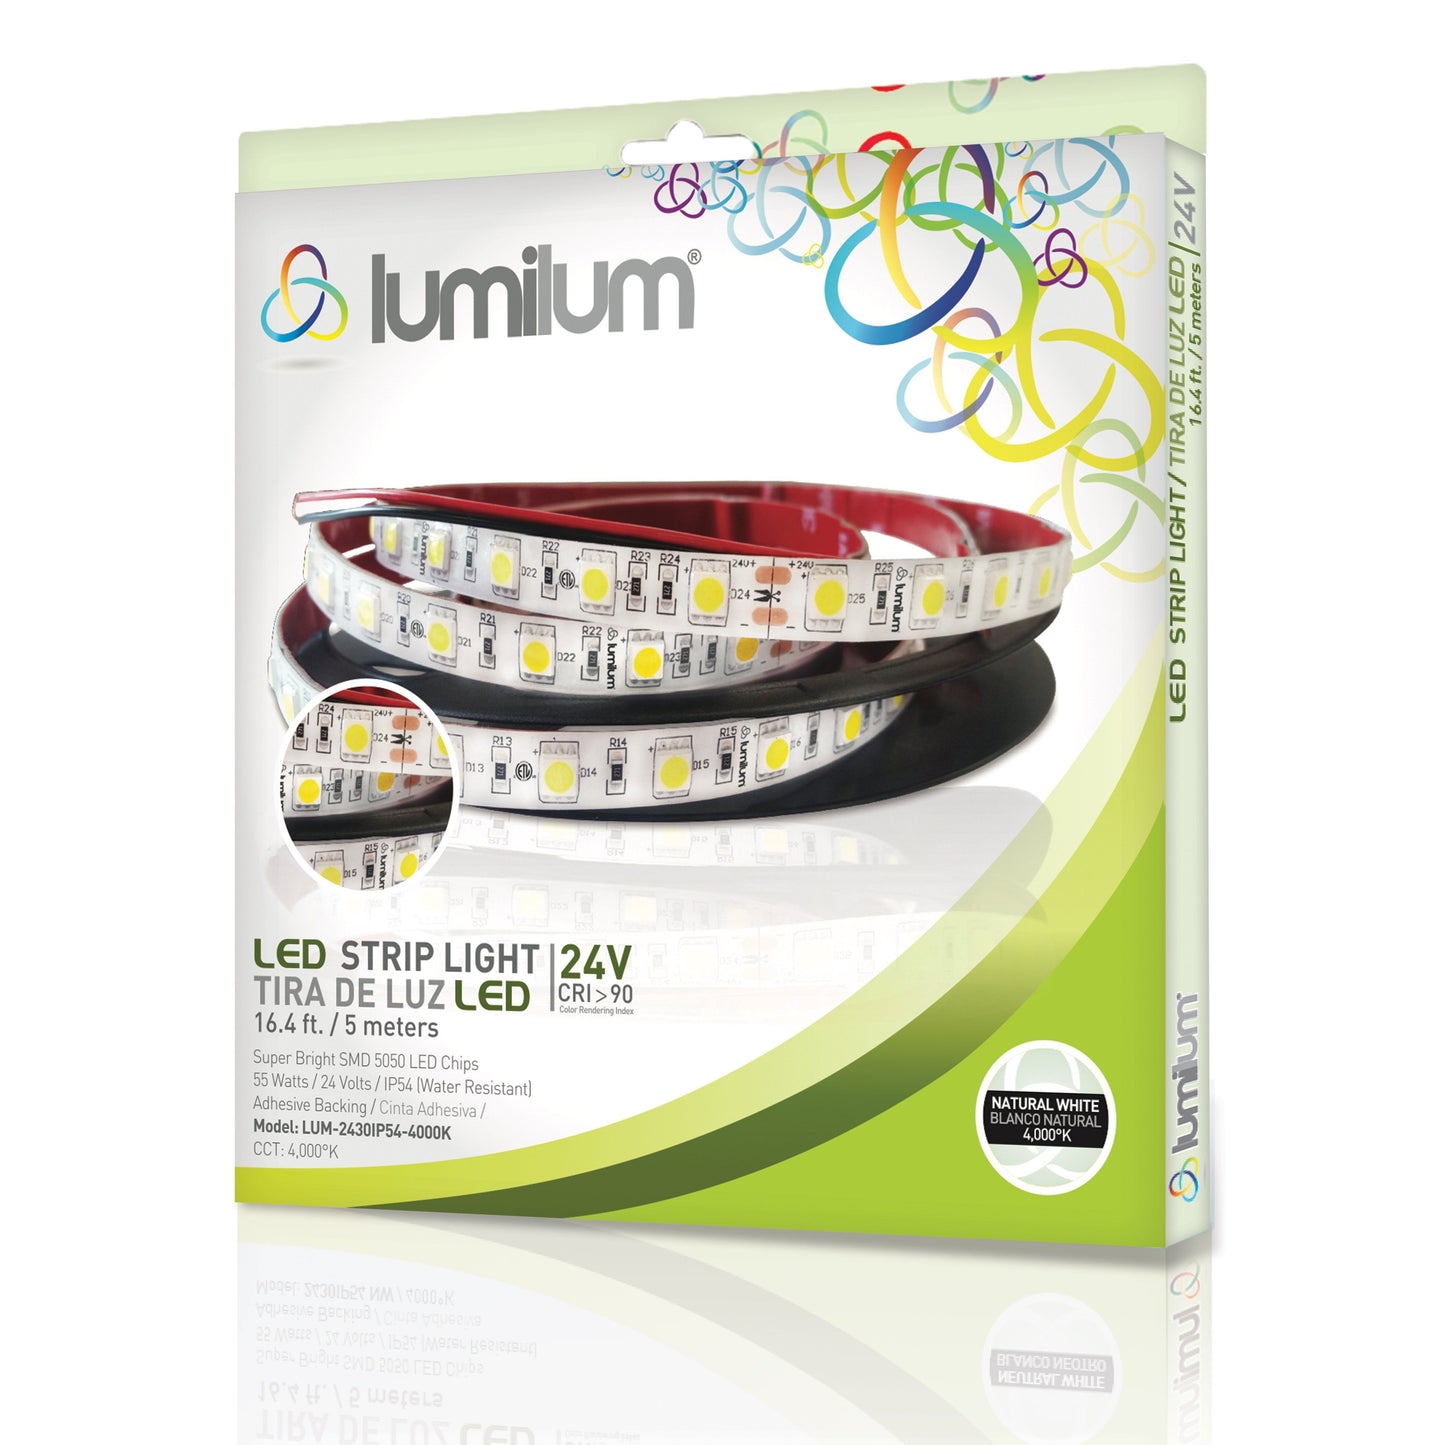 Load image into Gallery viewer, lumilum brand led strip light packaging in green with strip light image and 4000k product information text
